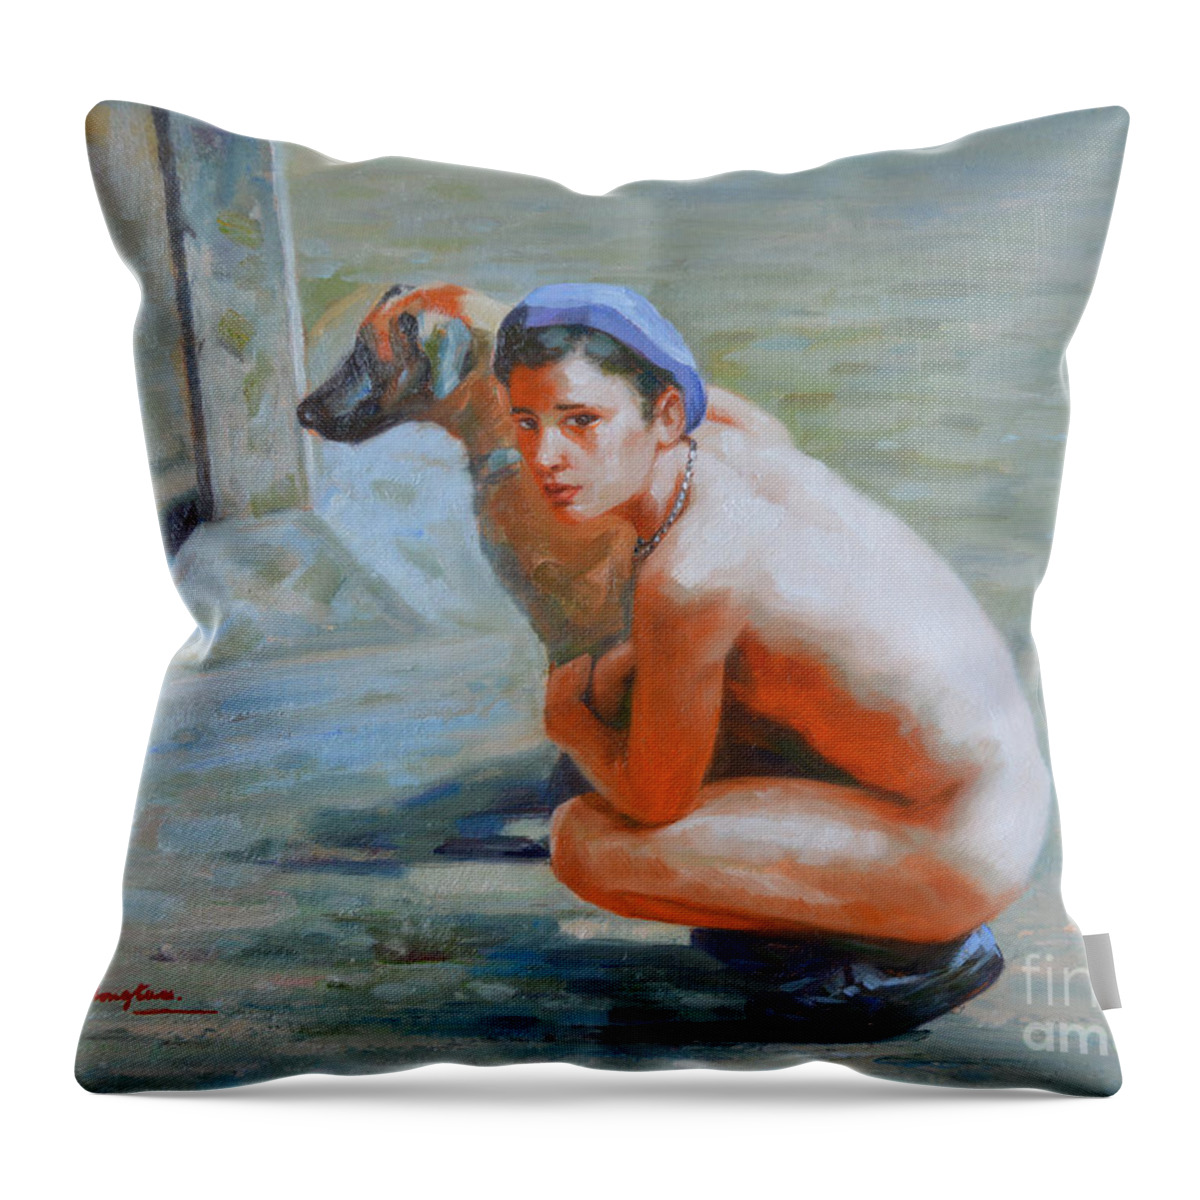 Original. Oil Painting Throw Pillow featuring the painting Original Impression Oil Painting Gay Man Body Art- Male Nude And Dog-020 by Hongtao Huang